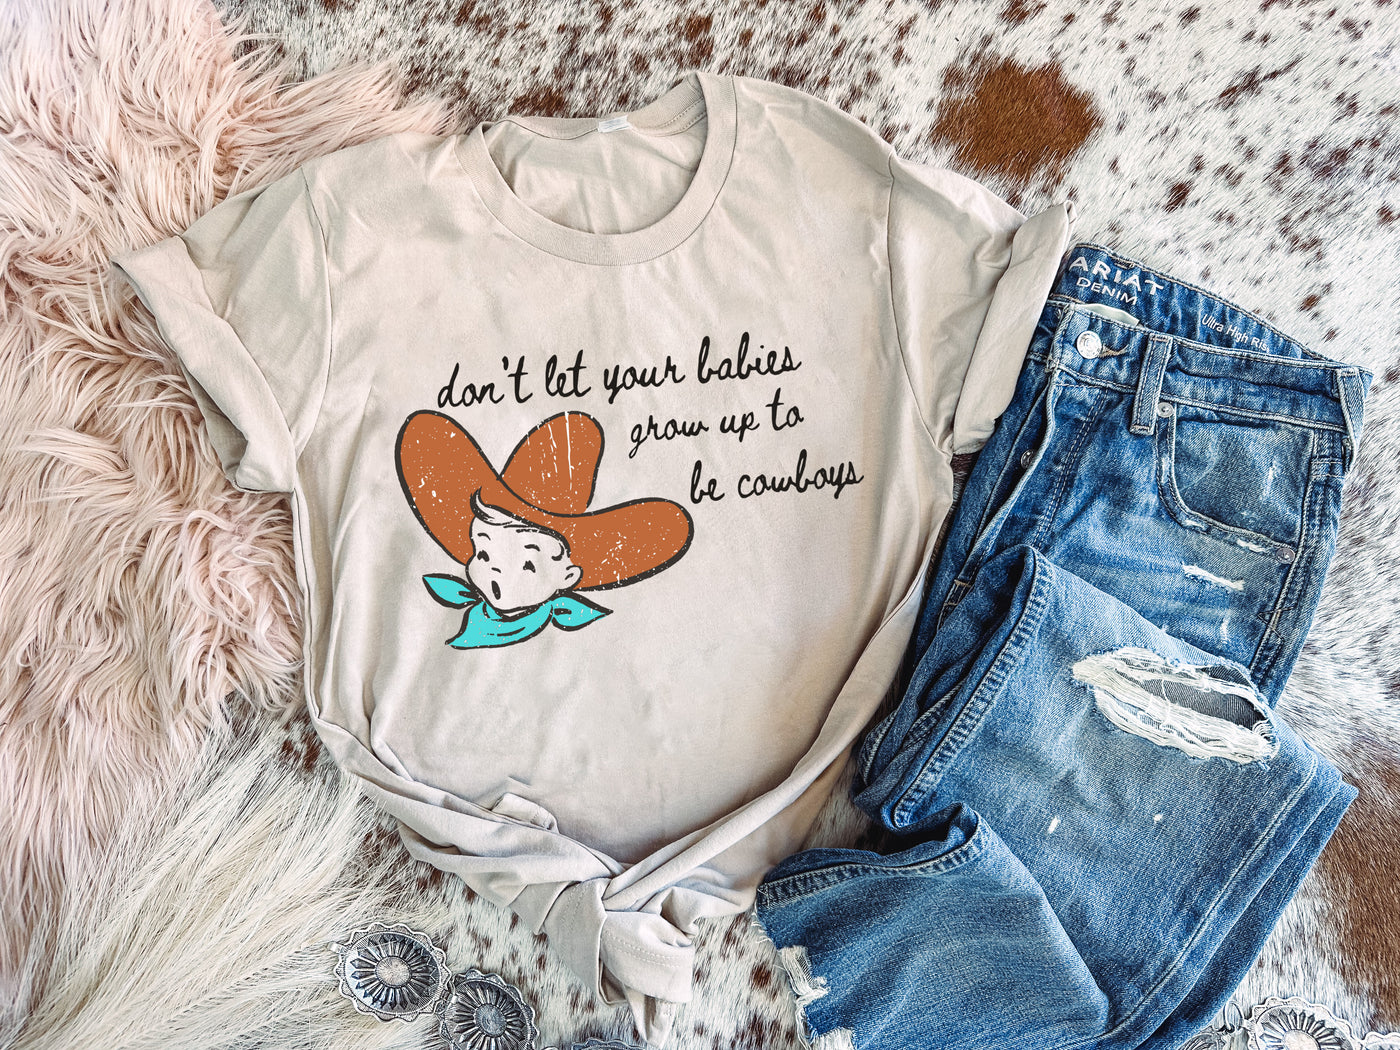 Grow Up To Be Cowboys - Graphic Top-110 GRAPHIC TEE-Adelyn Elaine's-Adelyn Elaine's Boutique, Women's Clothing Boutique in Gilmer, TX